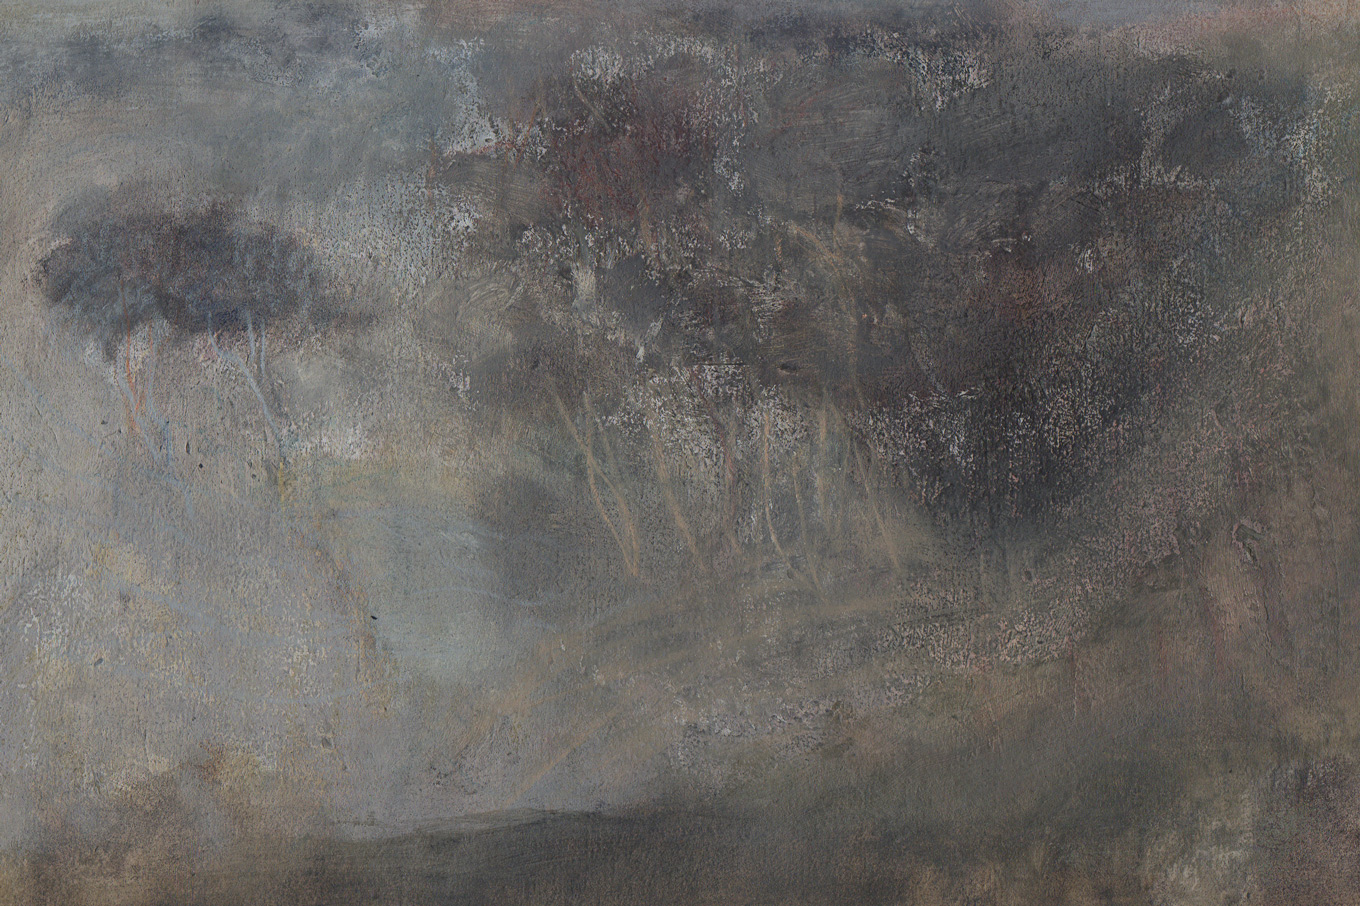 L1170 - Nicholas Herbert, British Artist, mixed media landscape painting of a view On the West Flank of Ivinghoe, The Chiltern Hills, 2019